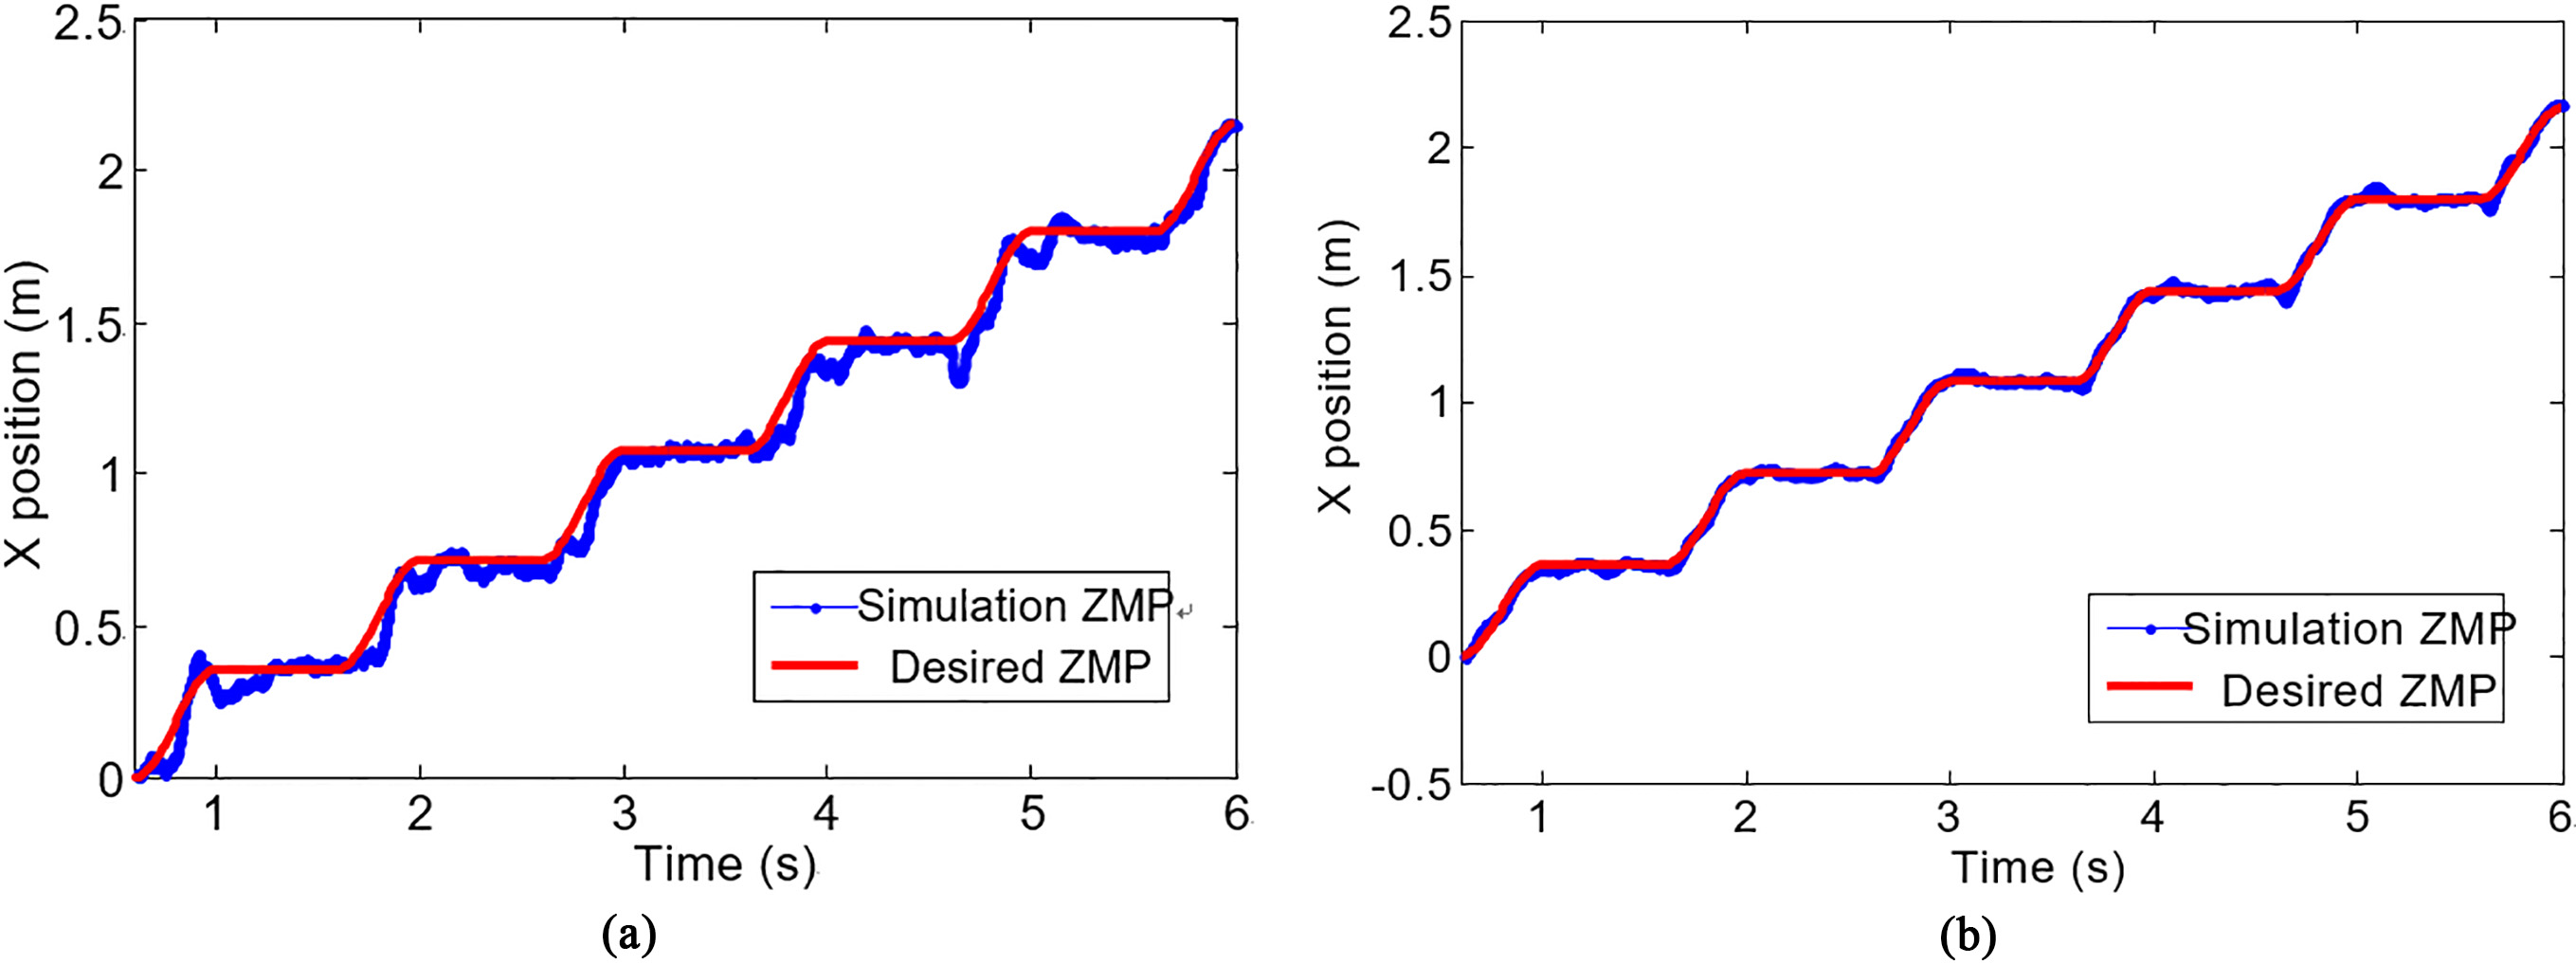 Desired and simulation ZMP trajectories. (a) Trajectories of biped robot with rigid ankle joint. (b) Trajectories of biped robot with variable ankle joint.